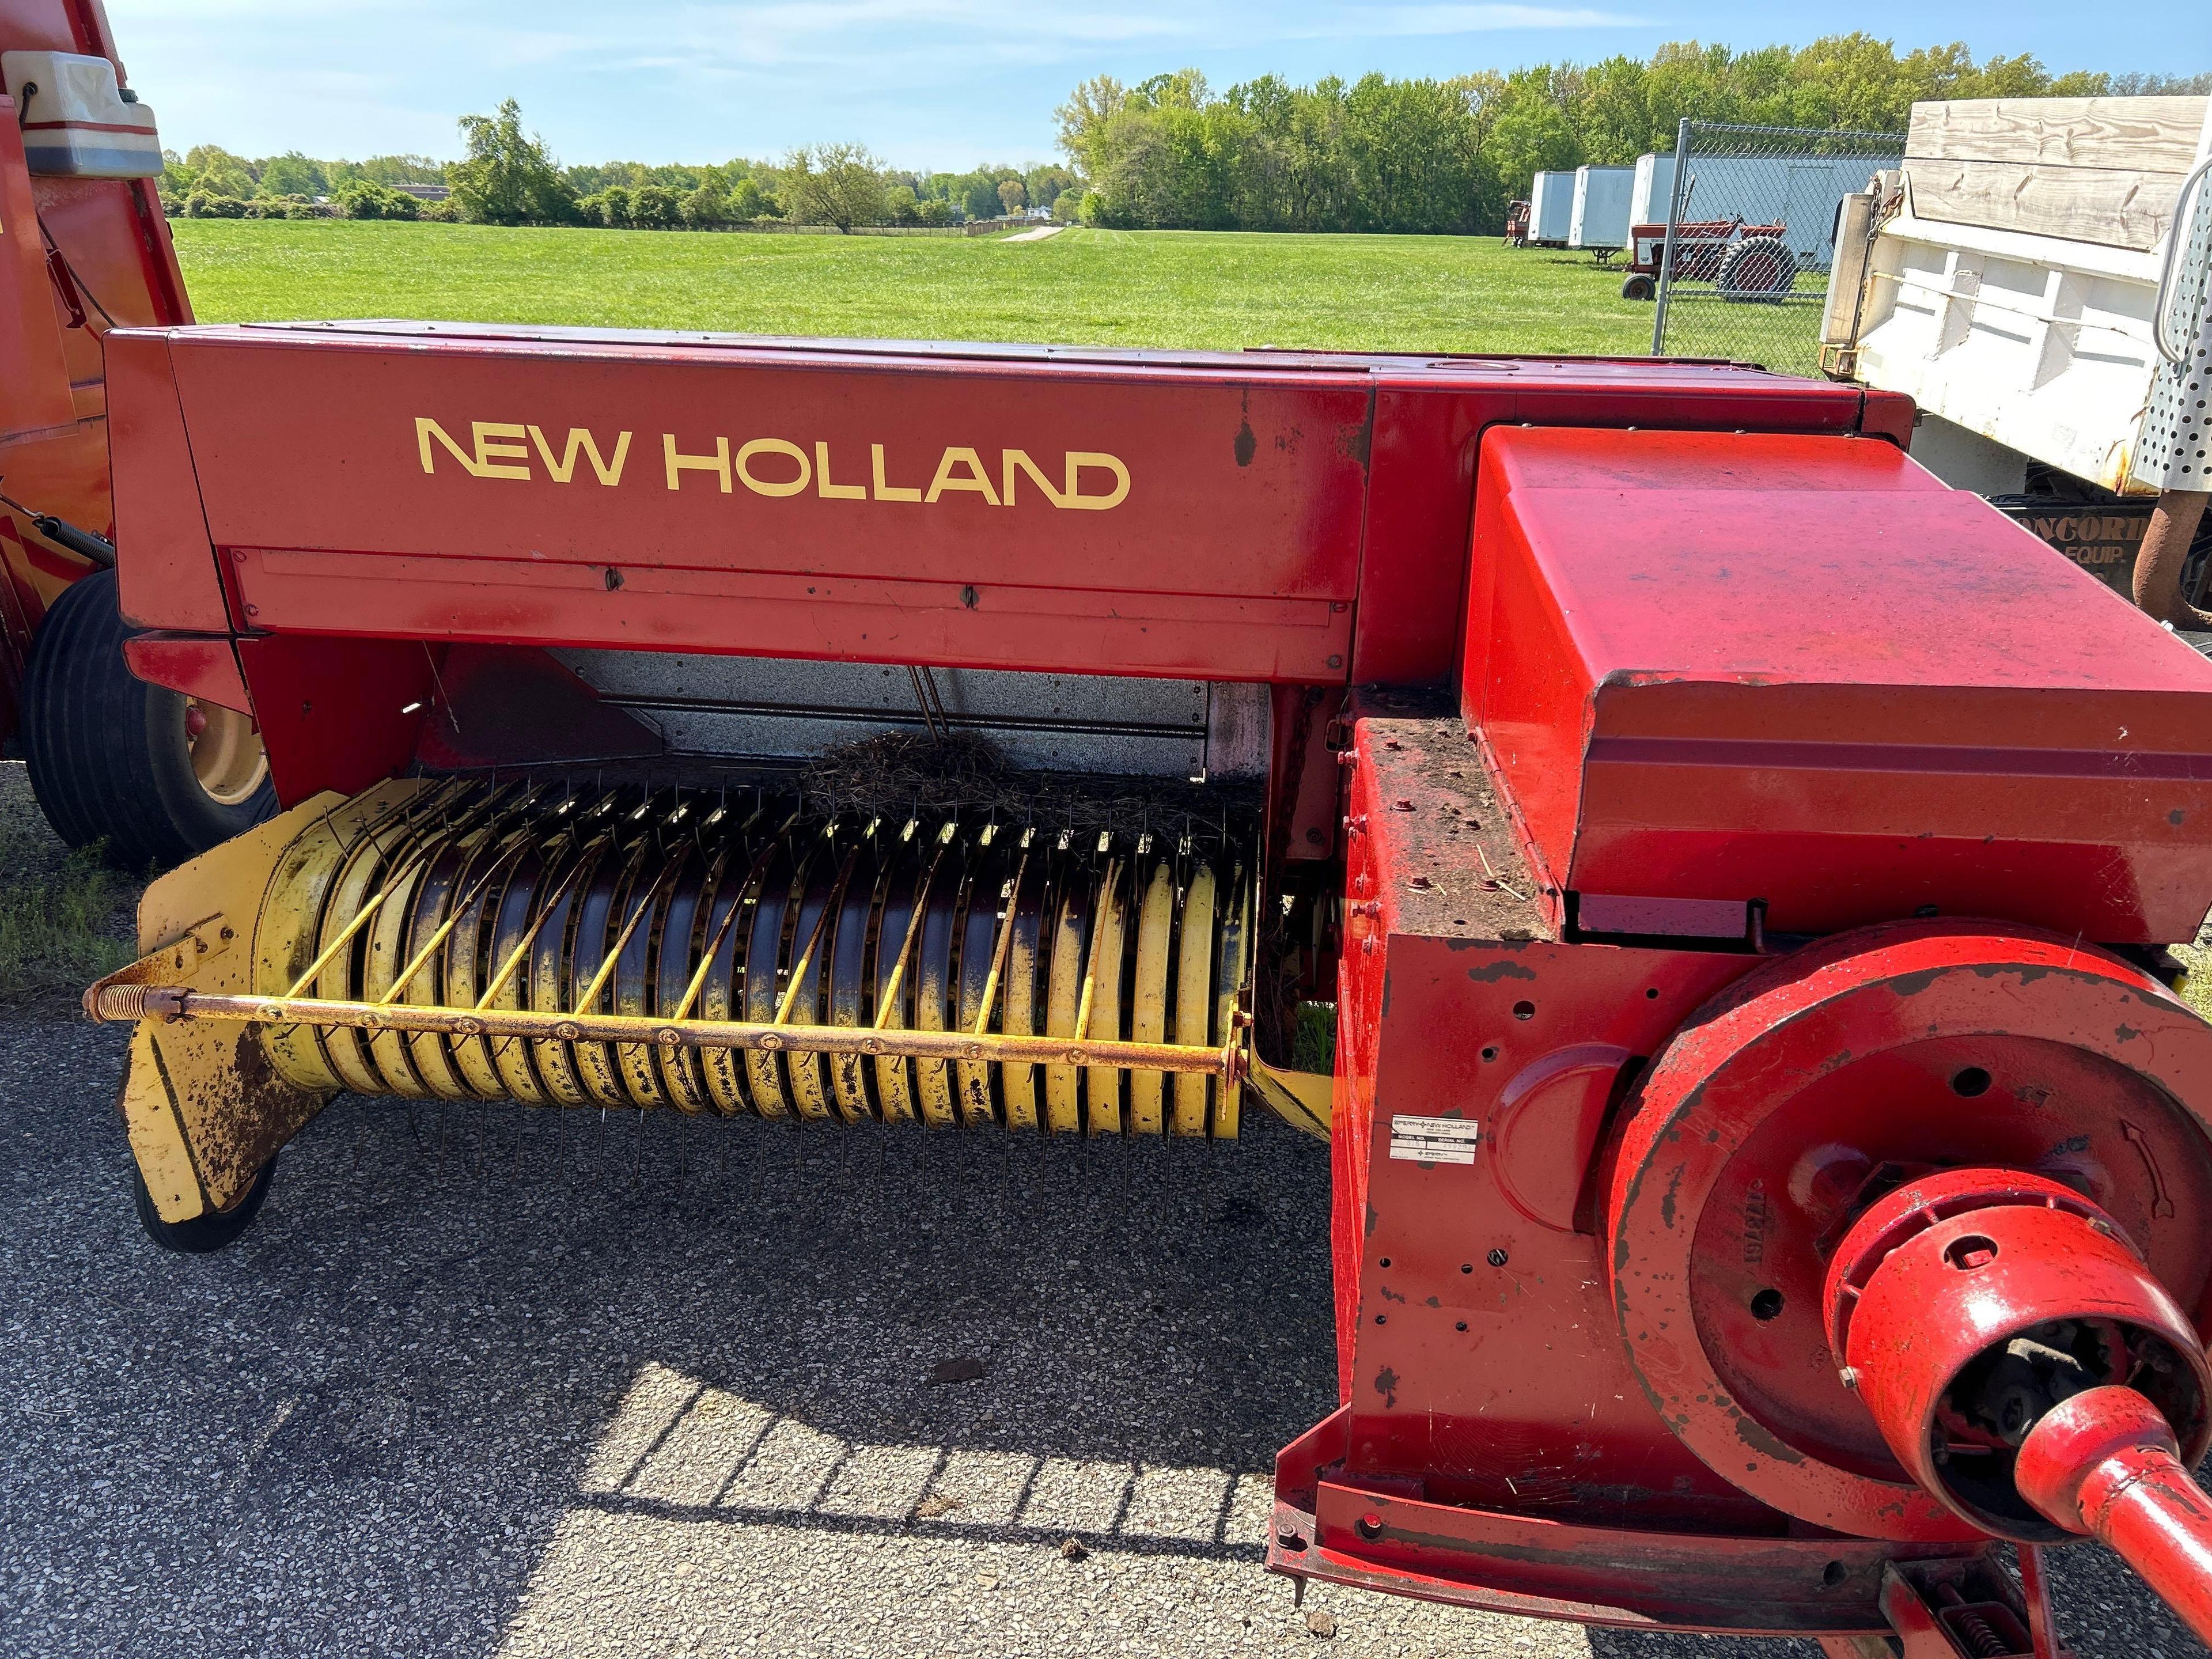 New Holland hayliner 315 Baler with chute